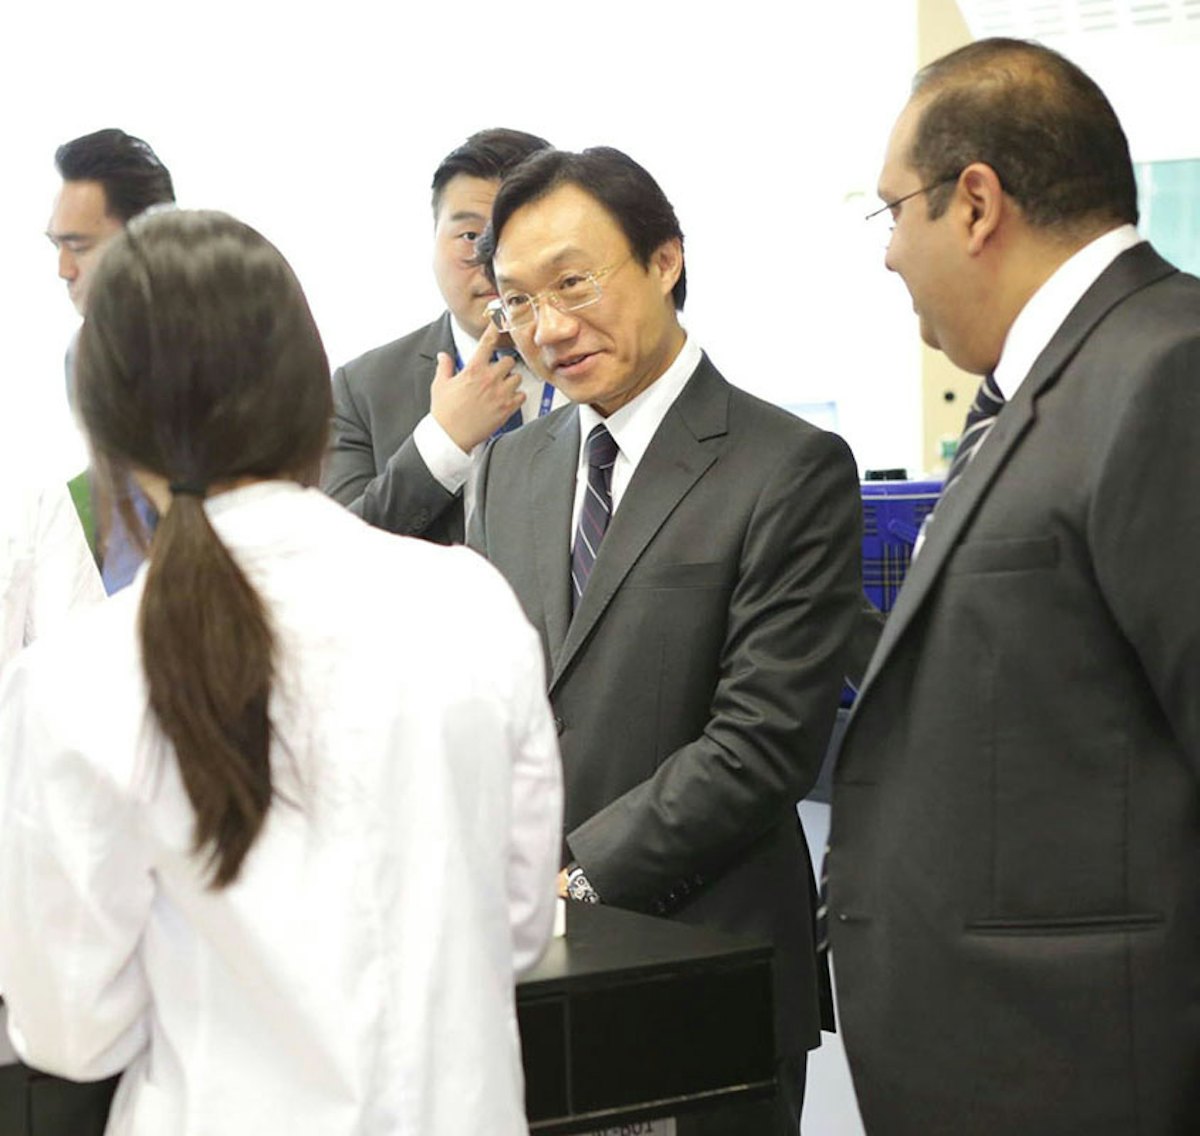 Alexis Tam, Macau’s Secretary for Social Affairs and Culture, visited School of the Nations in April 2017. Here Dr. Tam (second from right) visits a high school science laboratory with Vivek Nair (right), the school’s director.